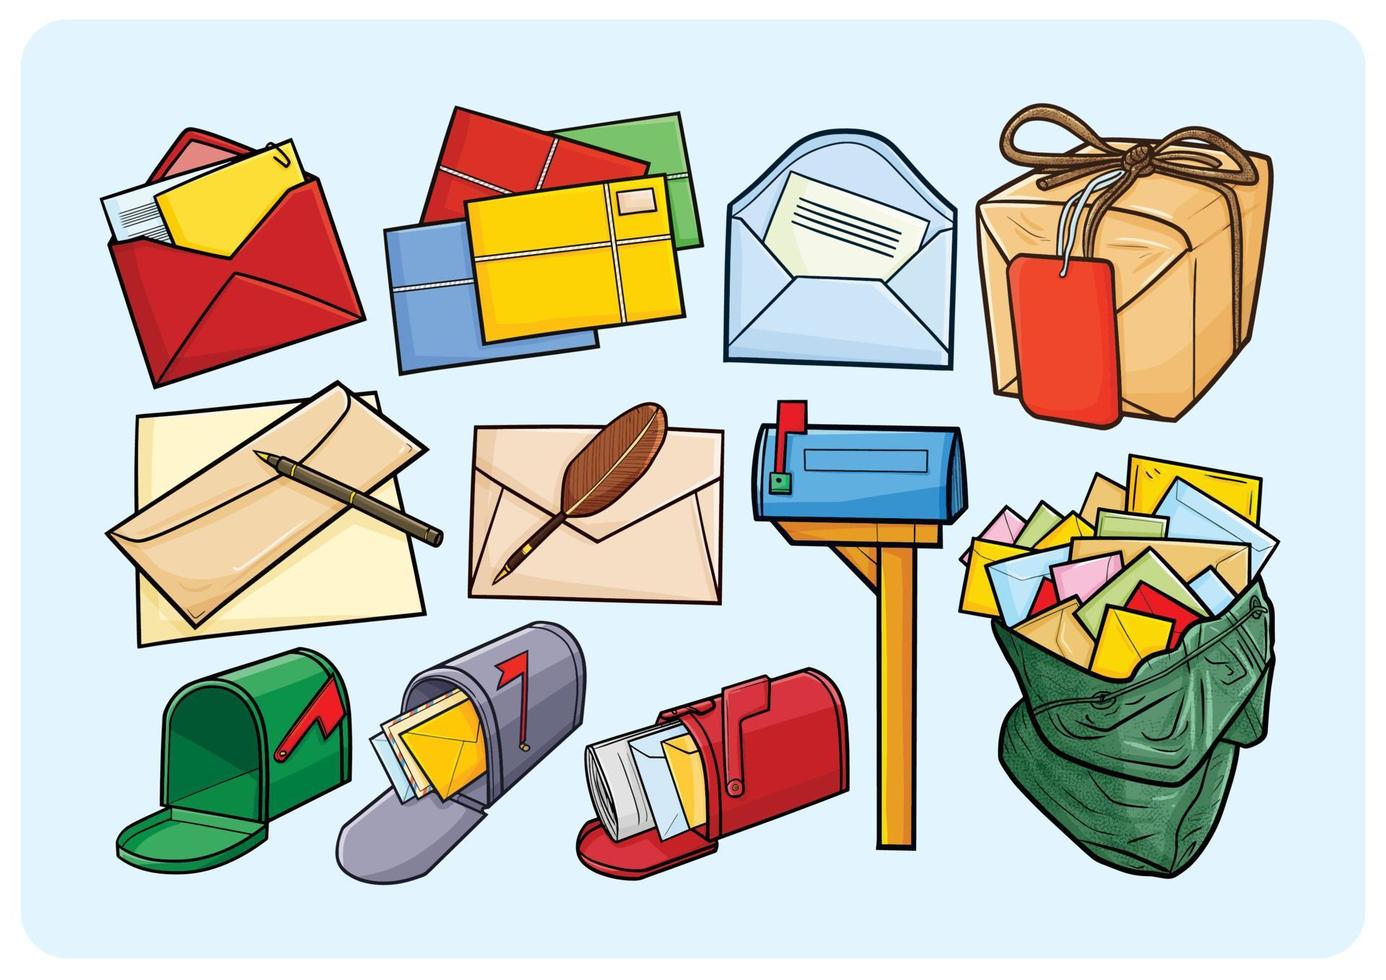 Mail and post item collection in simple cartoon style vector